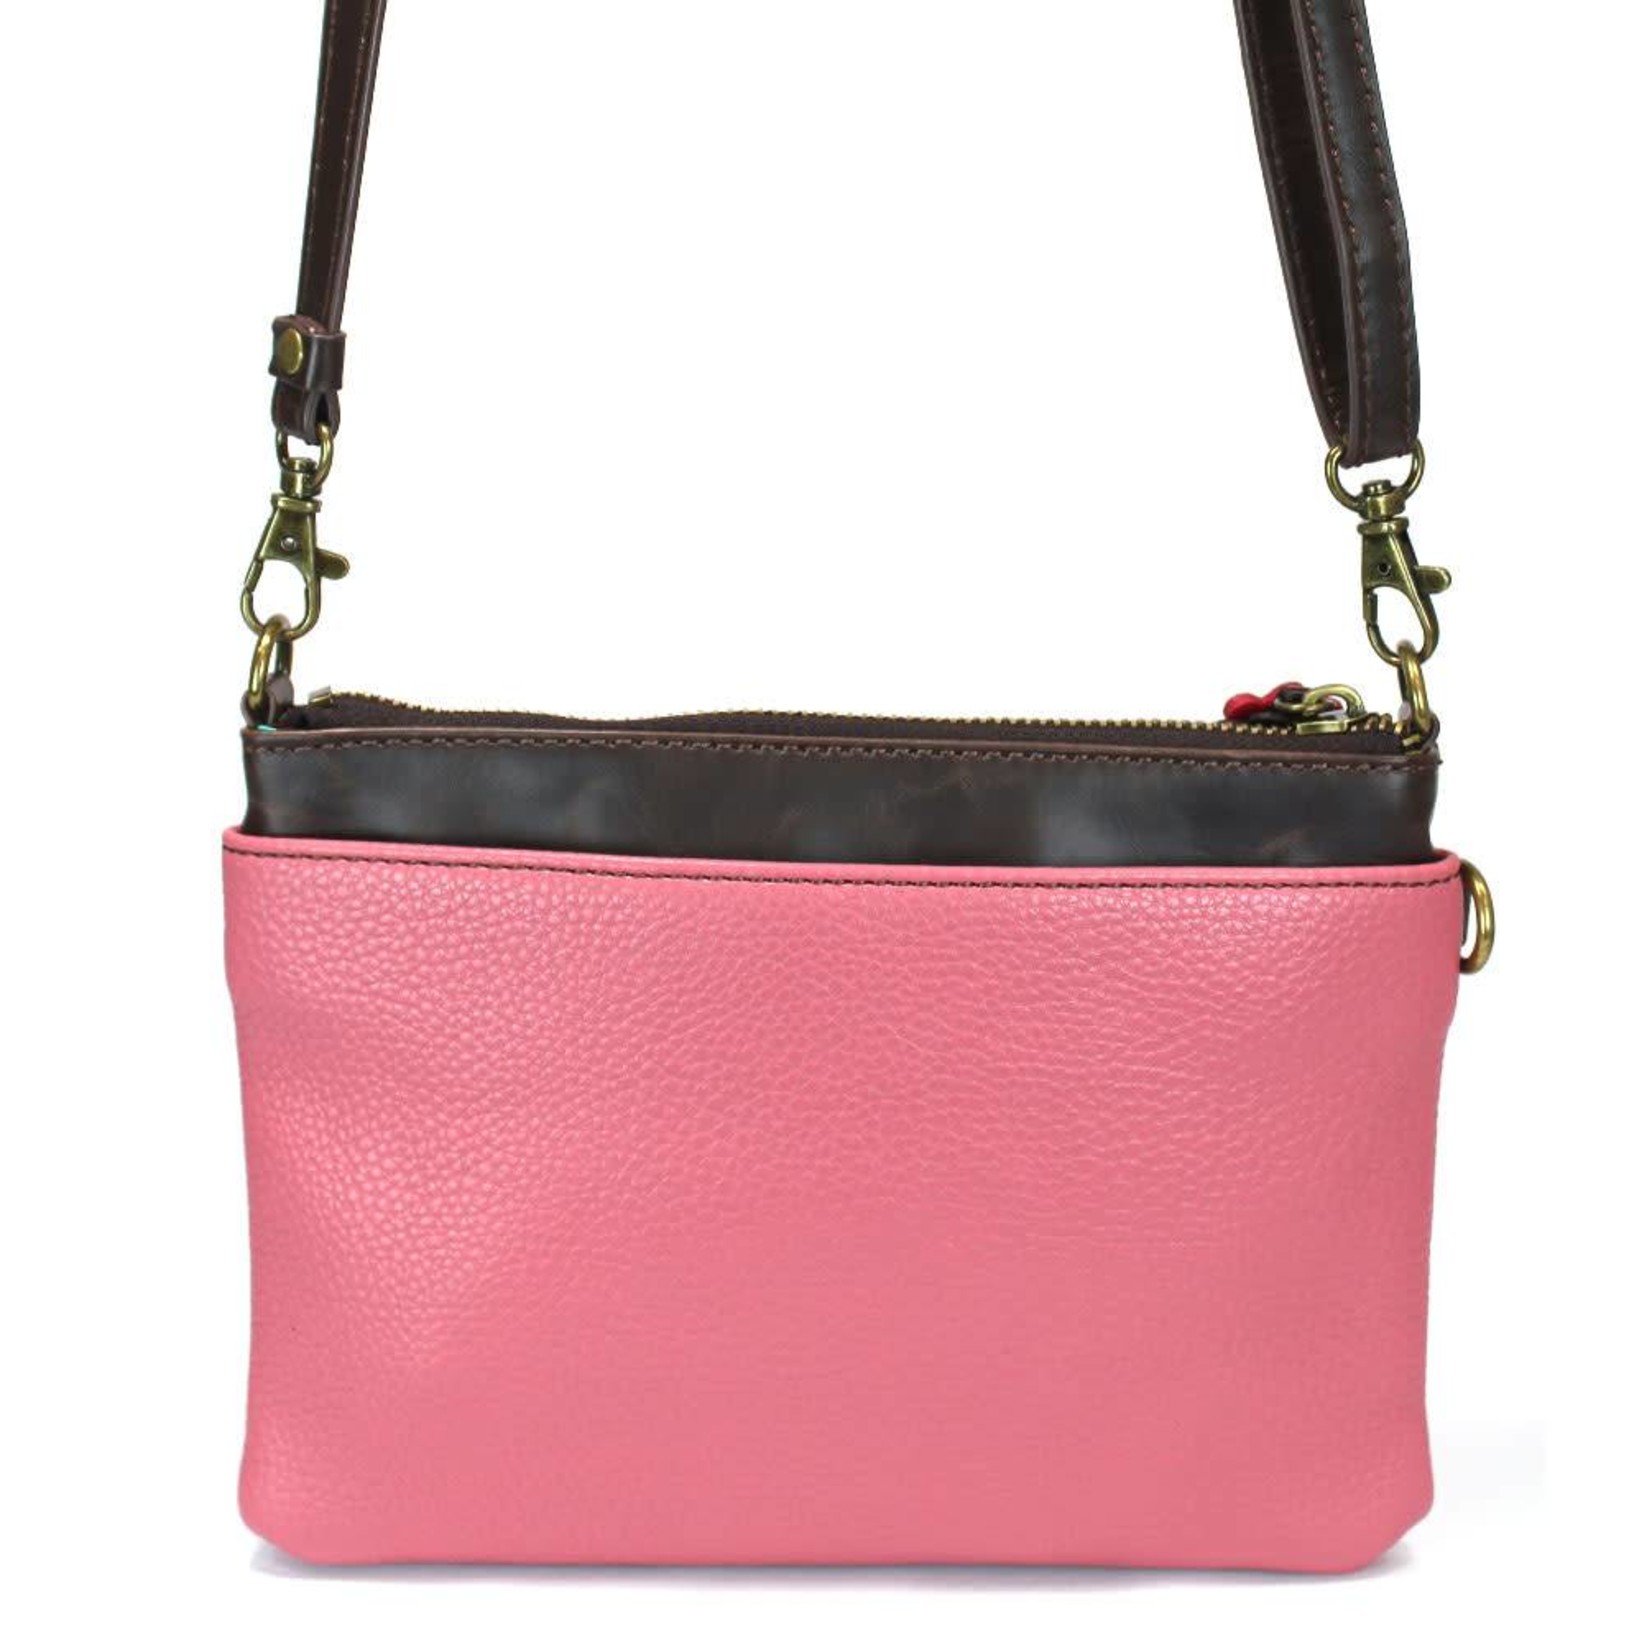 New Chala Hobo Crossbody Large Tote Bag DRAGONFLY Pleather PINK